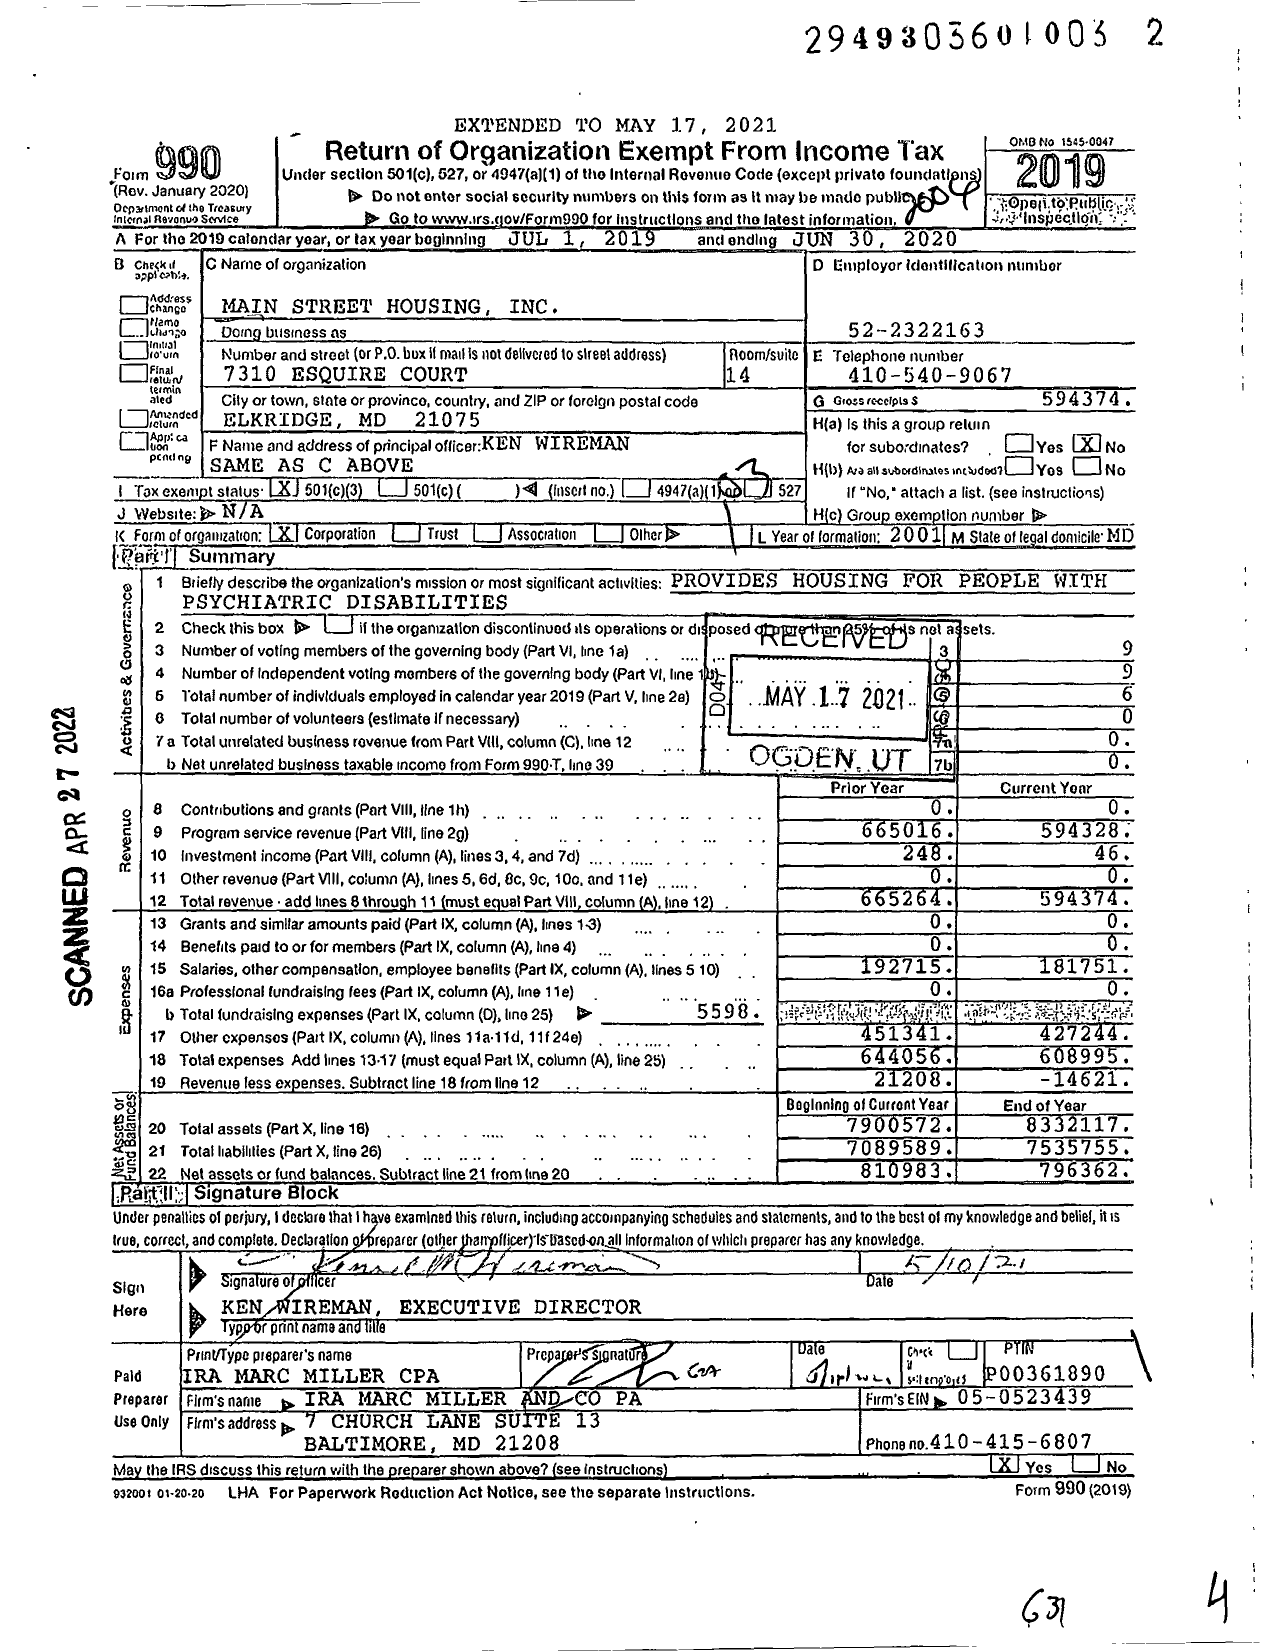 Image of first page of 2019 Form 990 for Main Street Housing